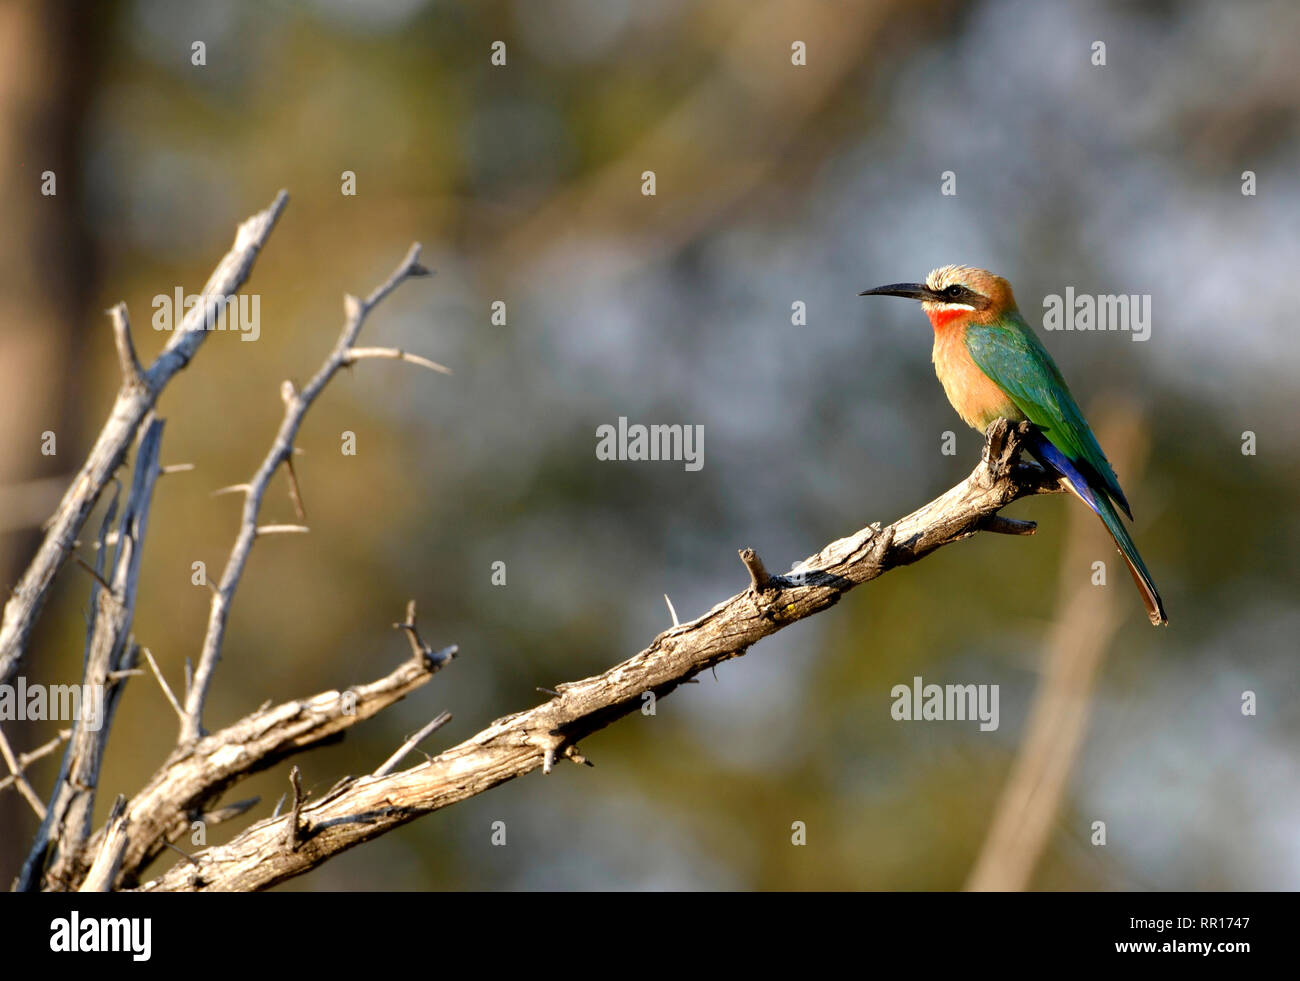 Zoologia, uccelli (Aves), bianco-fronteggiata Bee Eater (Merops bullockoides), Europea gruccione, Bwabwata Nat, Additional-Rights-Clearance-Info-Not-Available Foto Stock